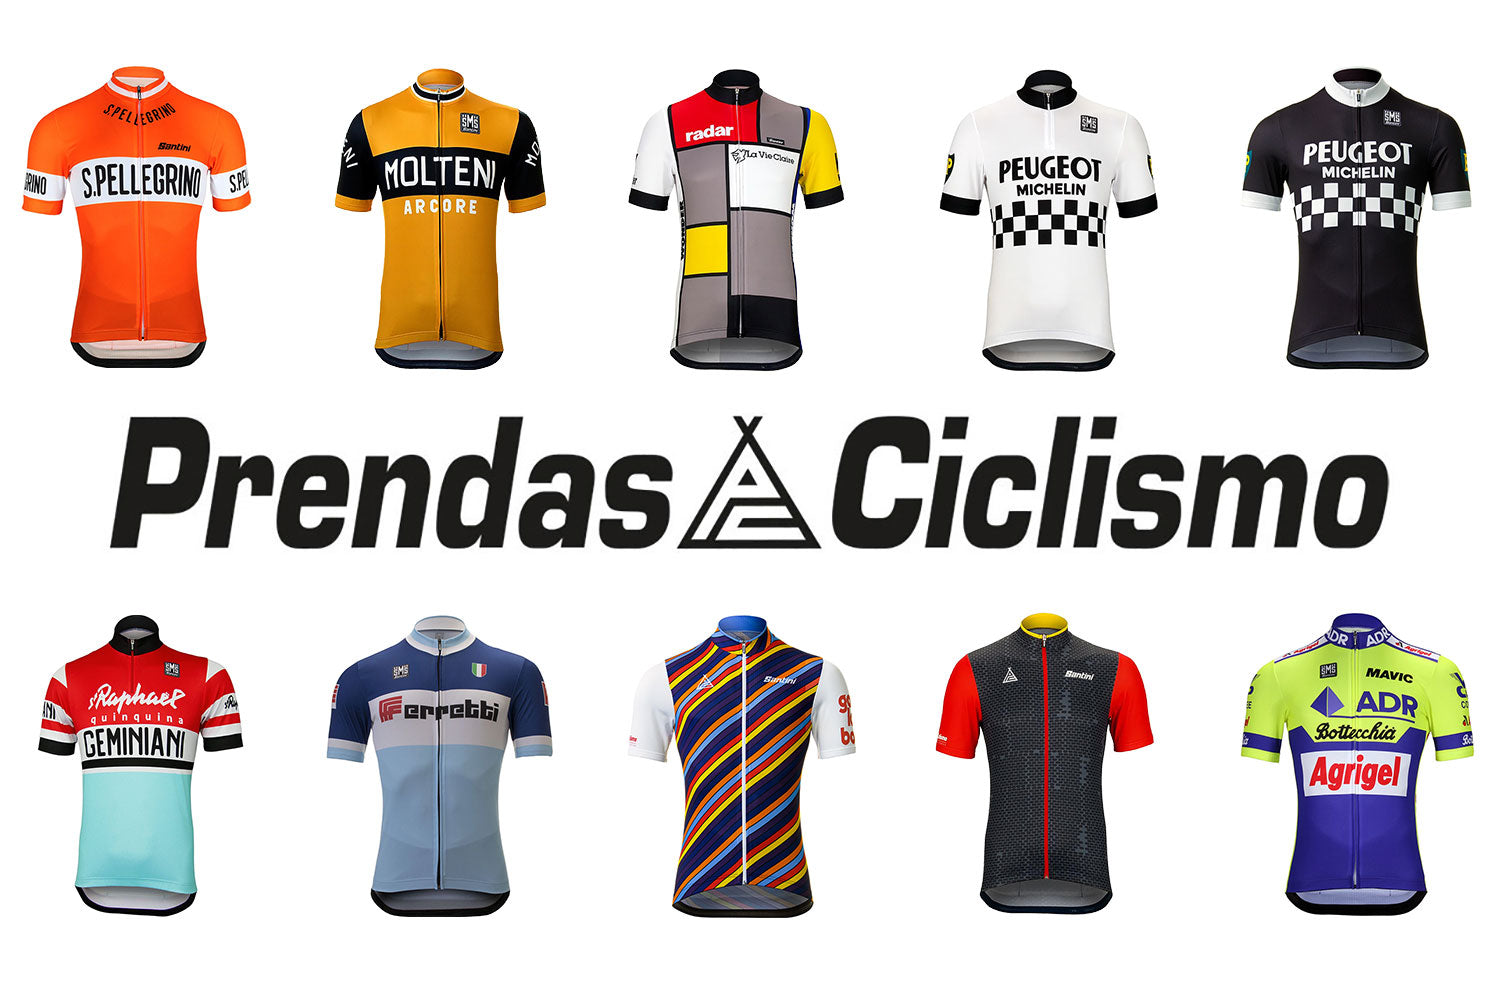 Which are the best-selling cycling jerseys of 2019?